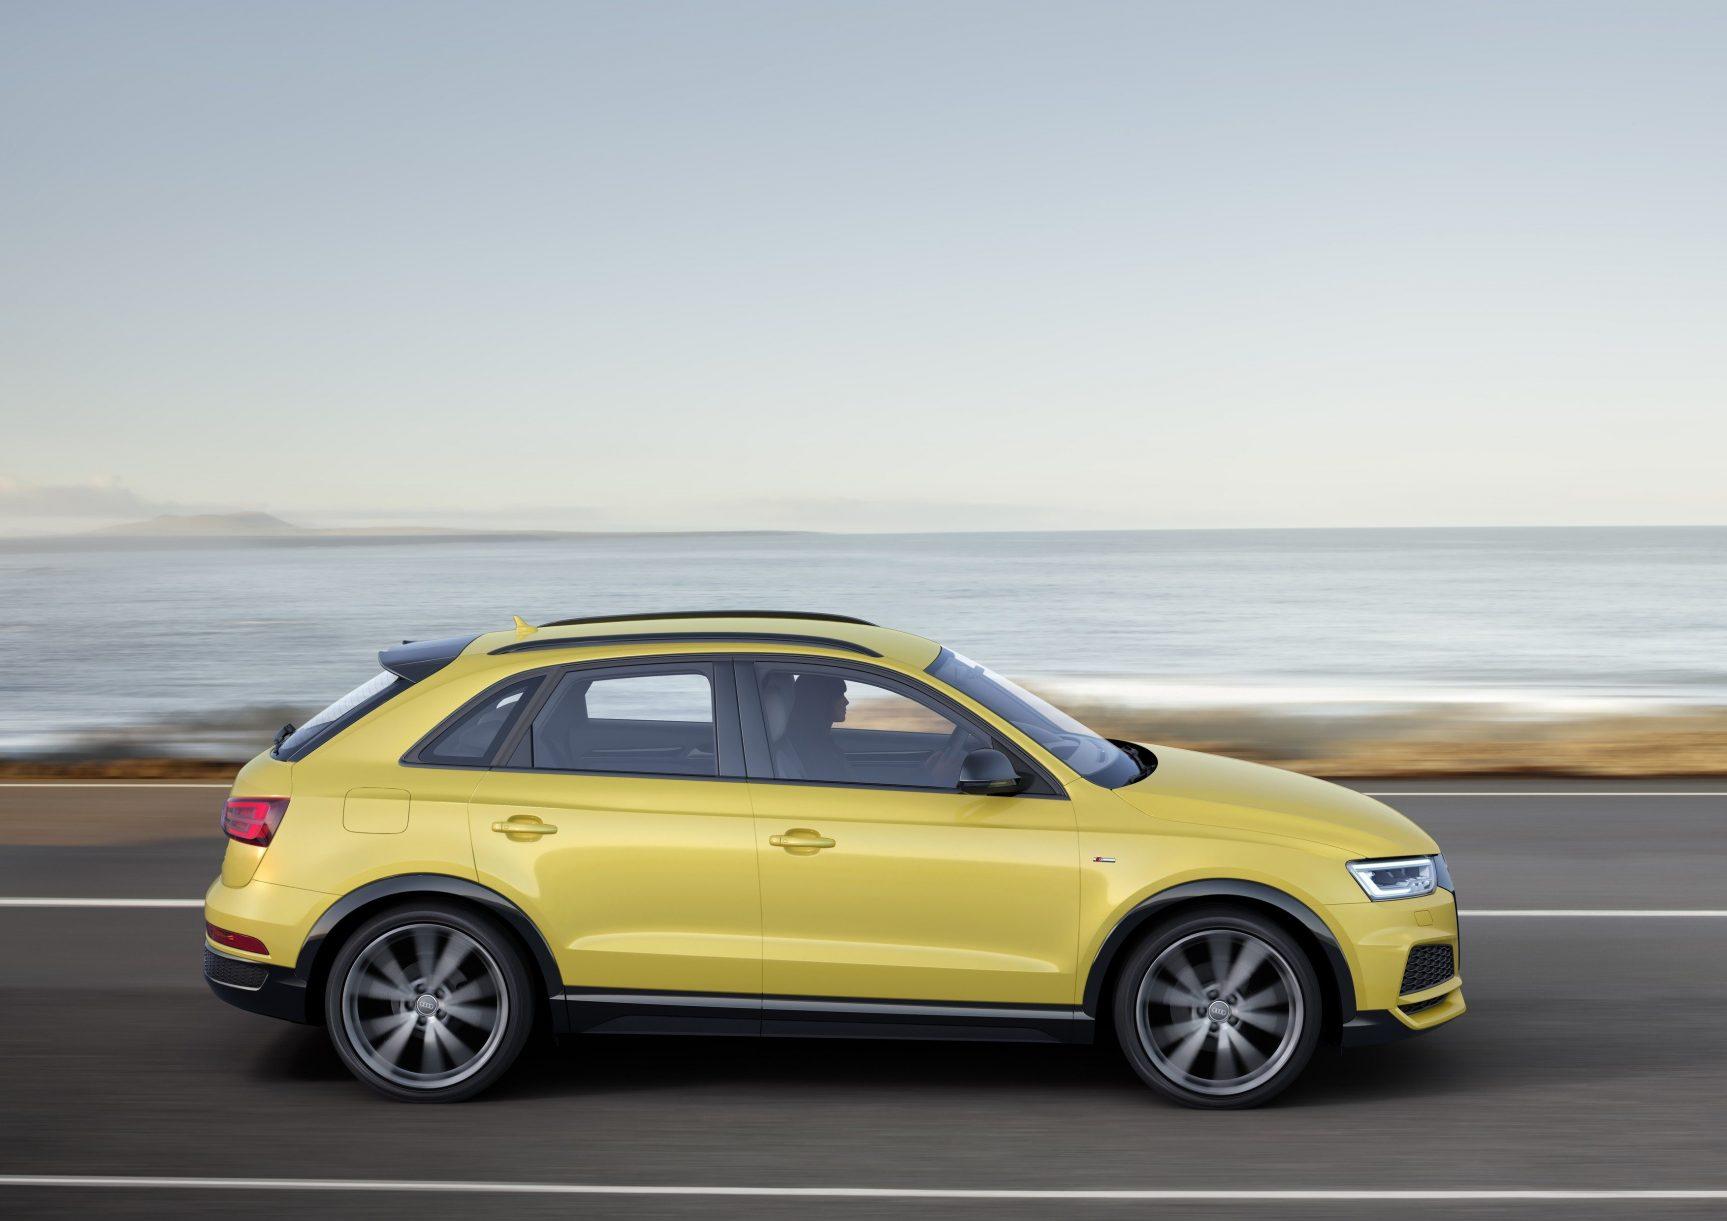 Audi Q Review, Engine, Release Date, Exterior, Price, Redesign